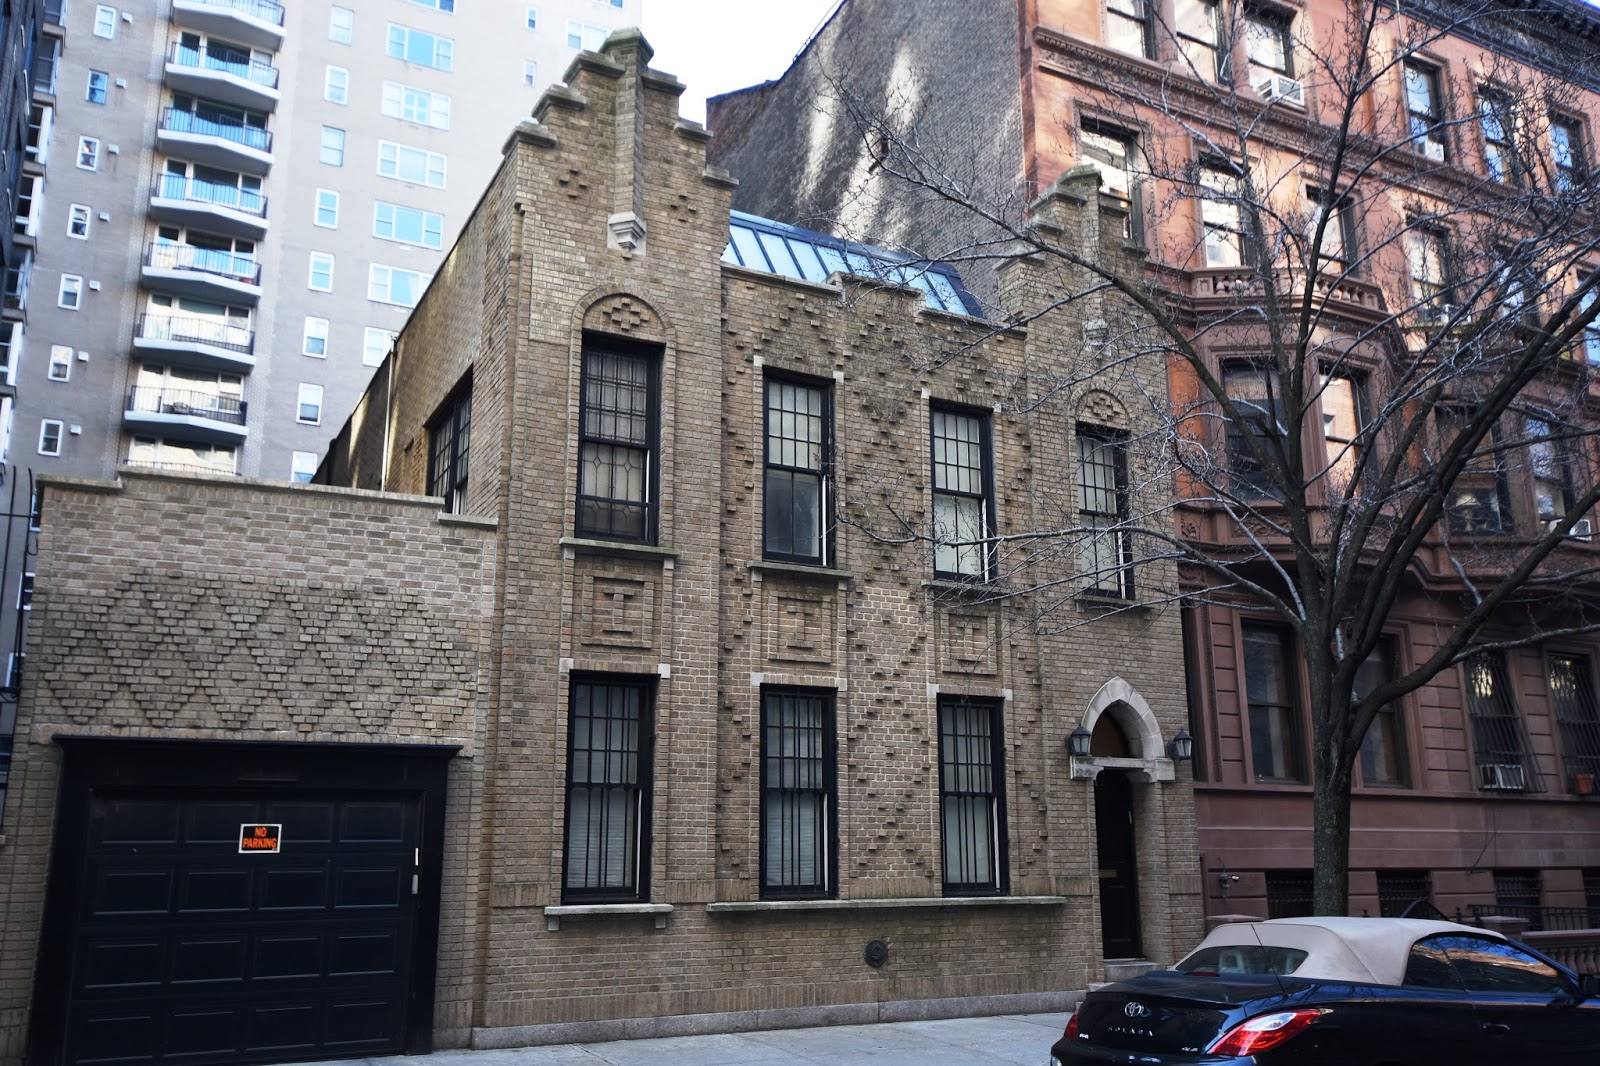 Daytonian in Manhattan: The Unexplained Charmer at No. 12 West 69th Street